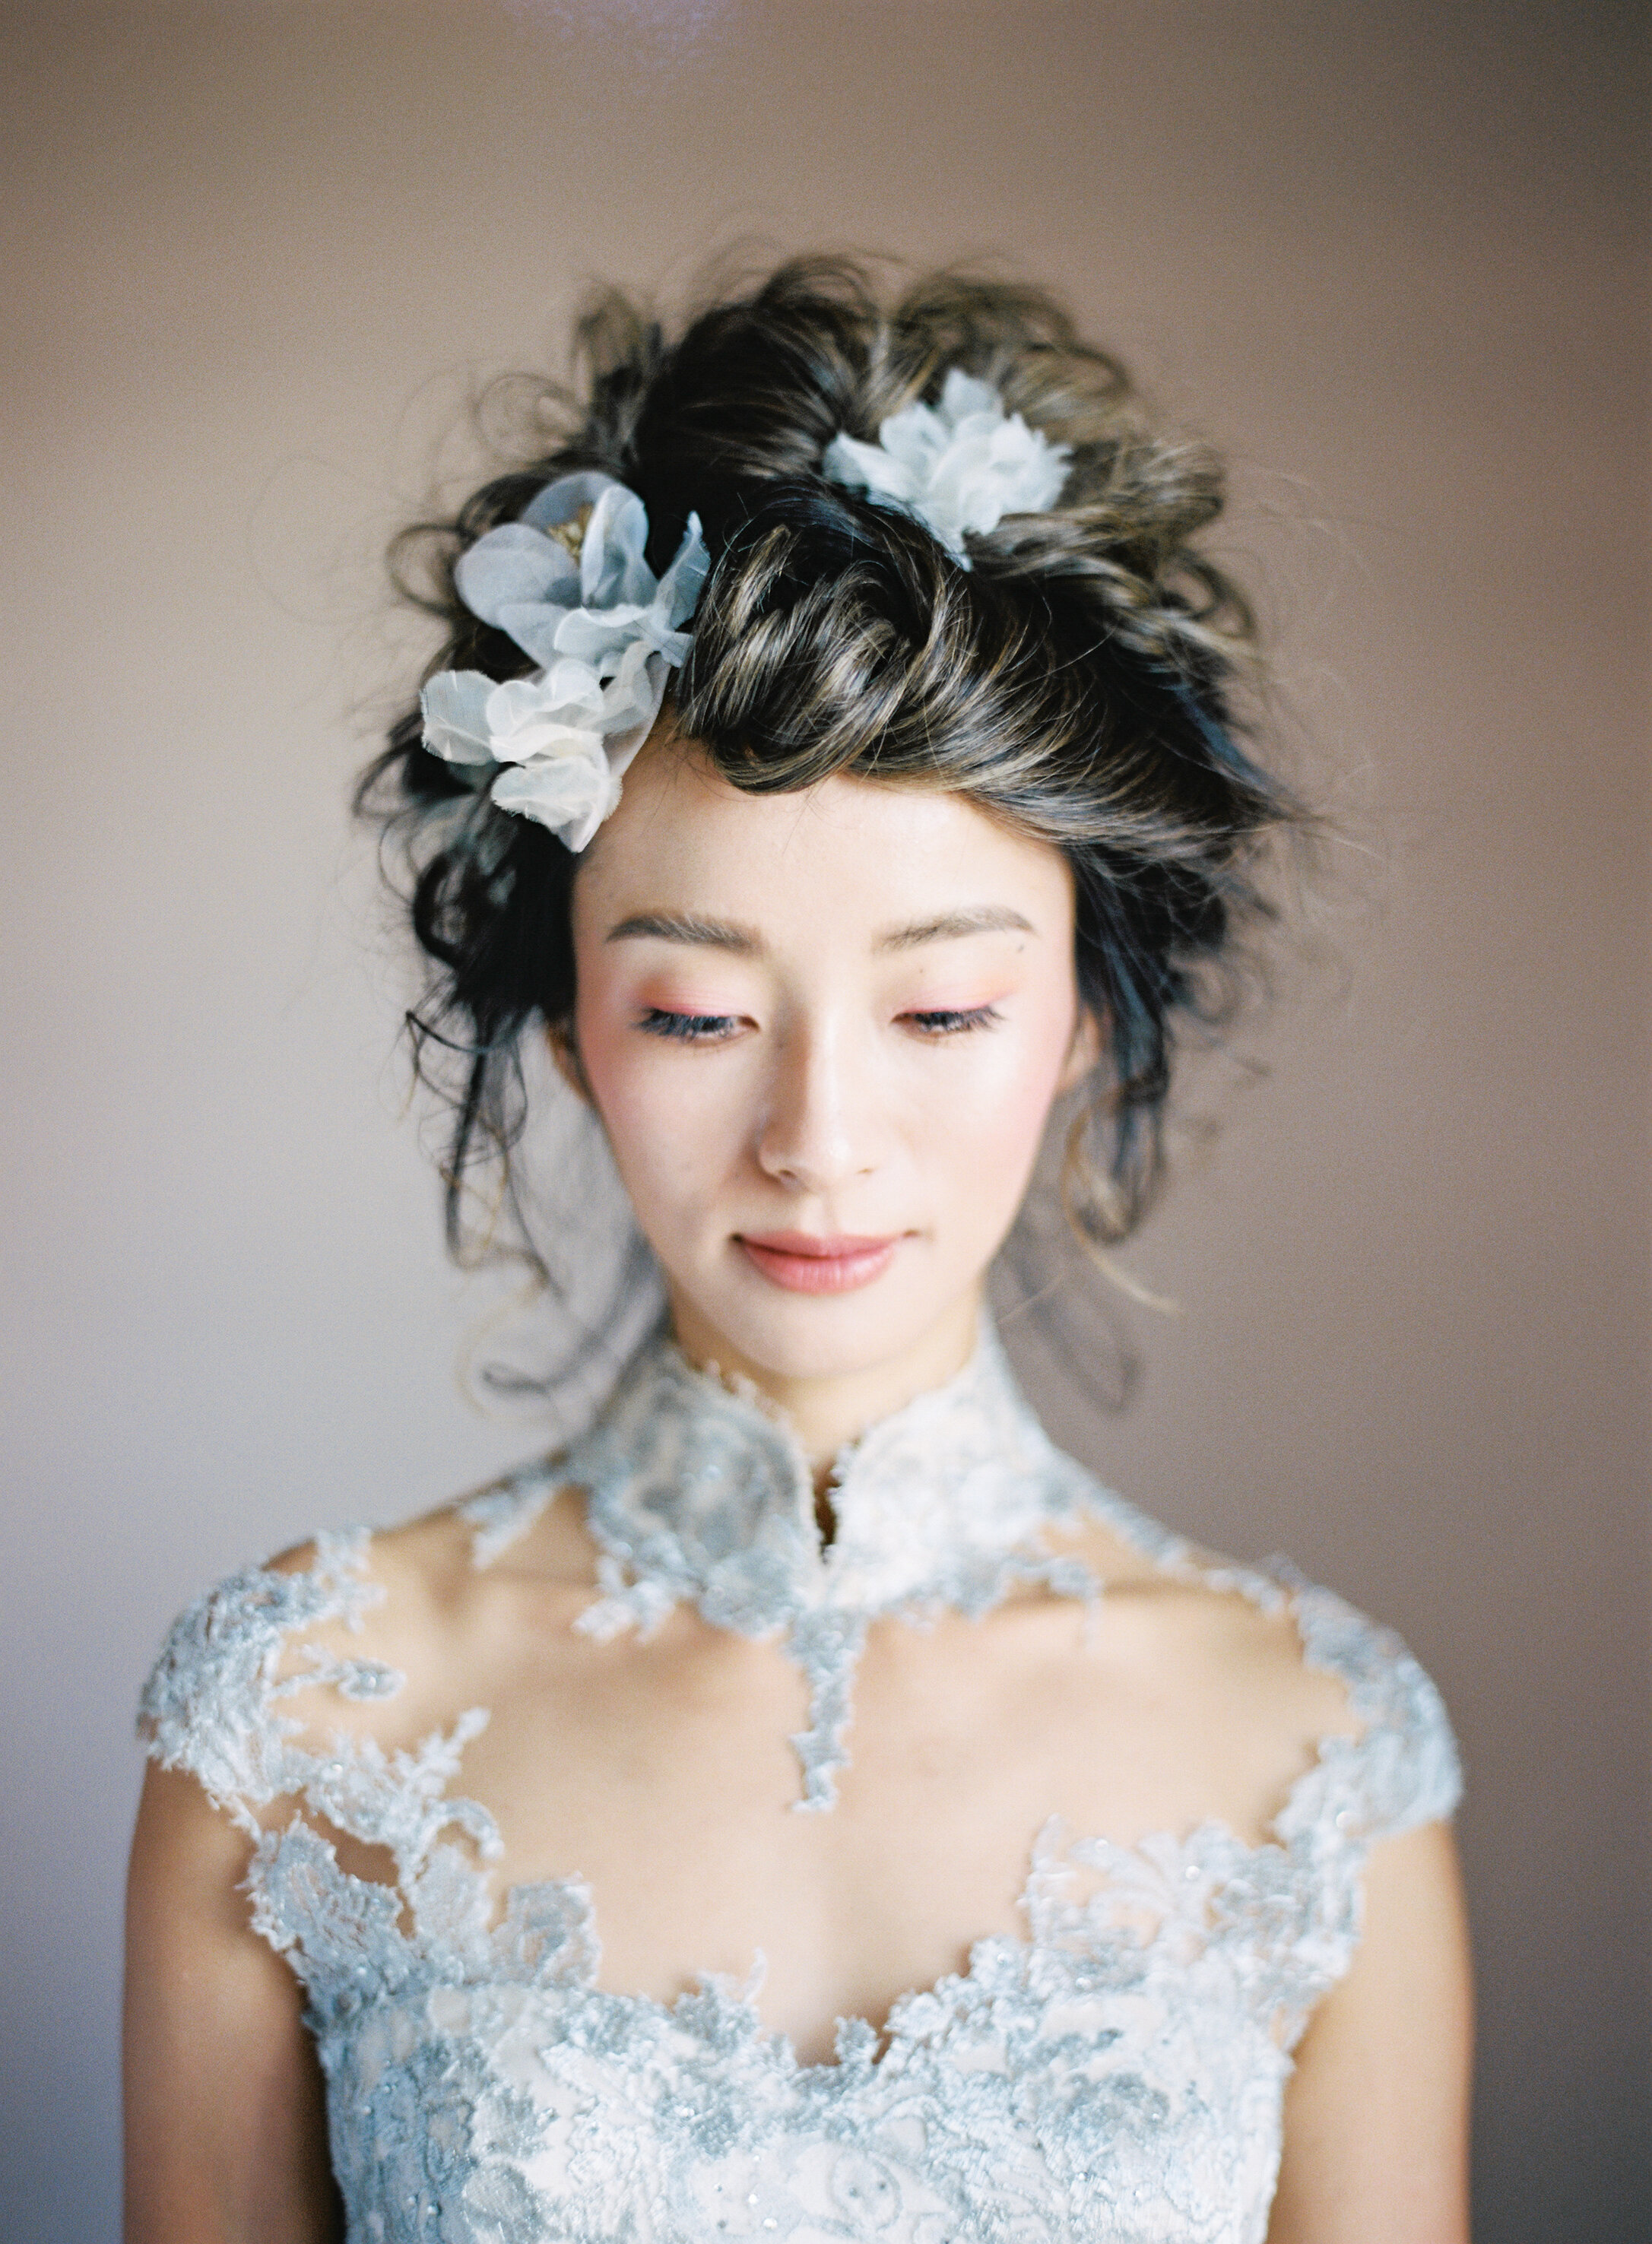 Chinese-Bride-Editorial-Selects-10-Jen_Huang-250806_015.jpg